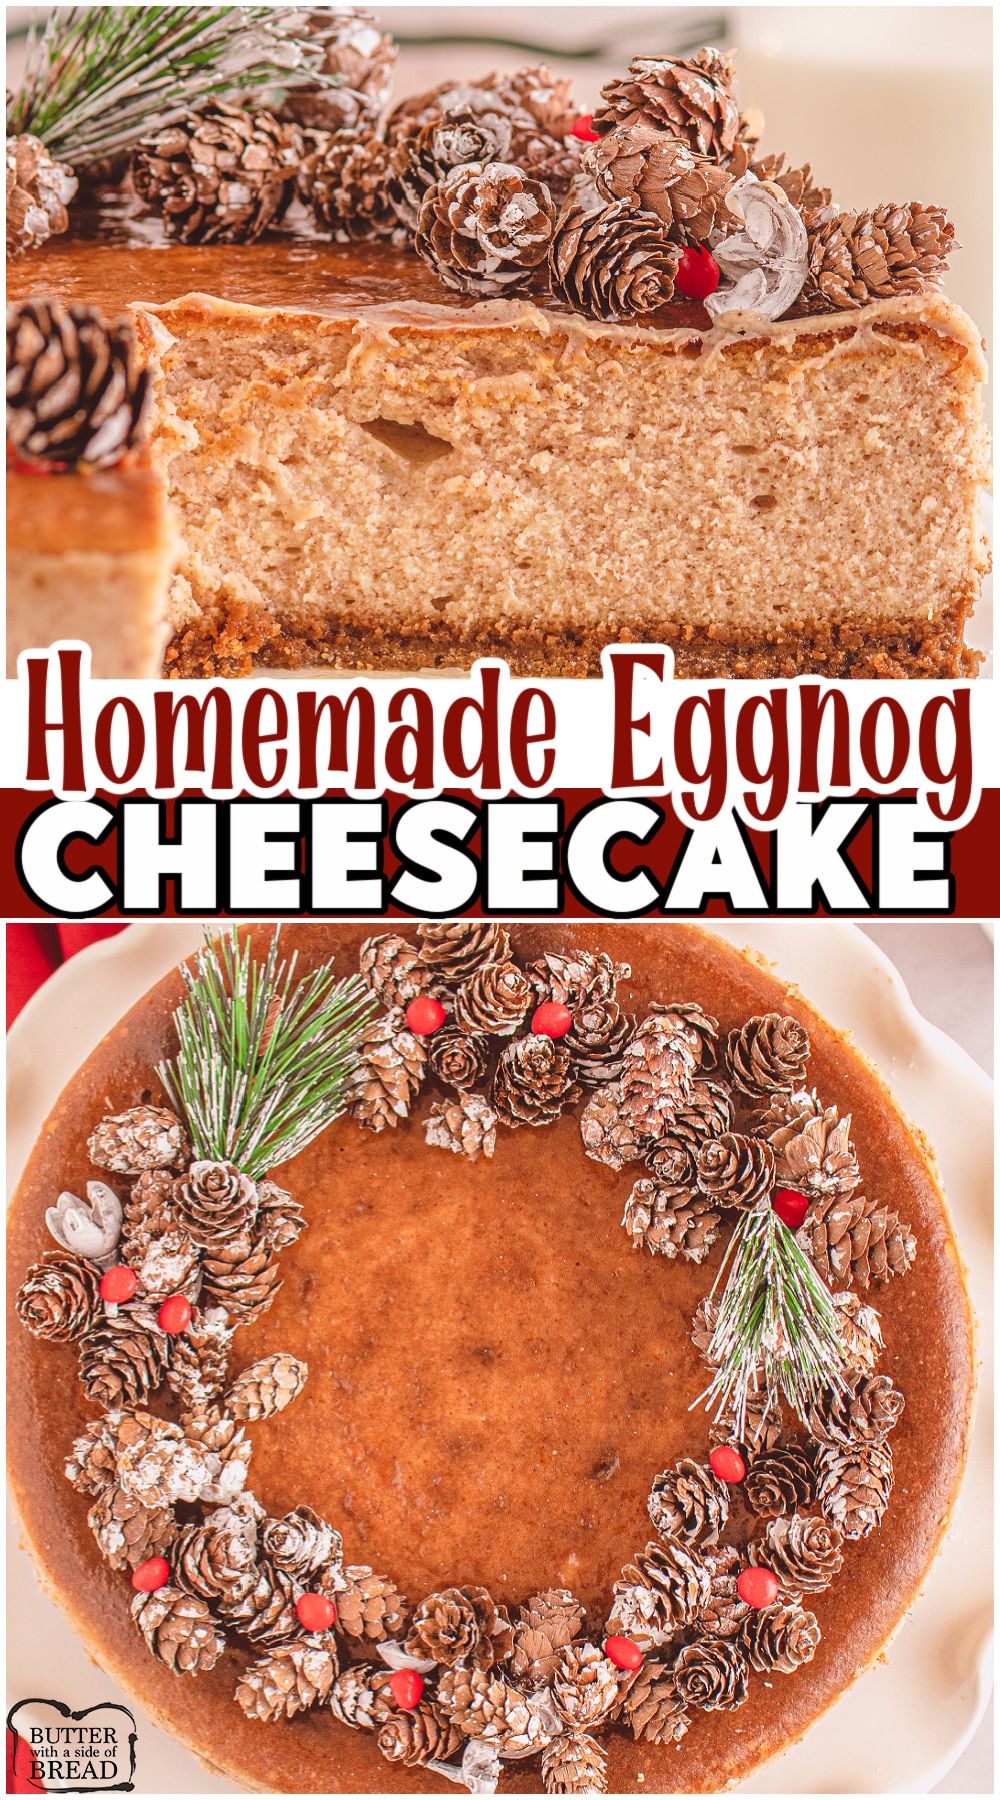 Eggnog cheesecake made with a gingersnap crust, fresh nutmeg & your favorite eggnog! Smooth & creamy cheesecake recipe blends the best holiday flavors for a delightful, festive eggnog dessert.